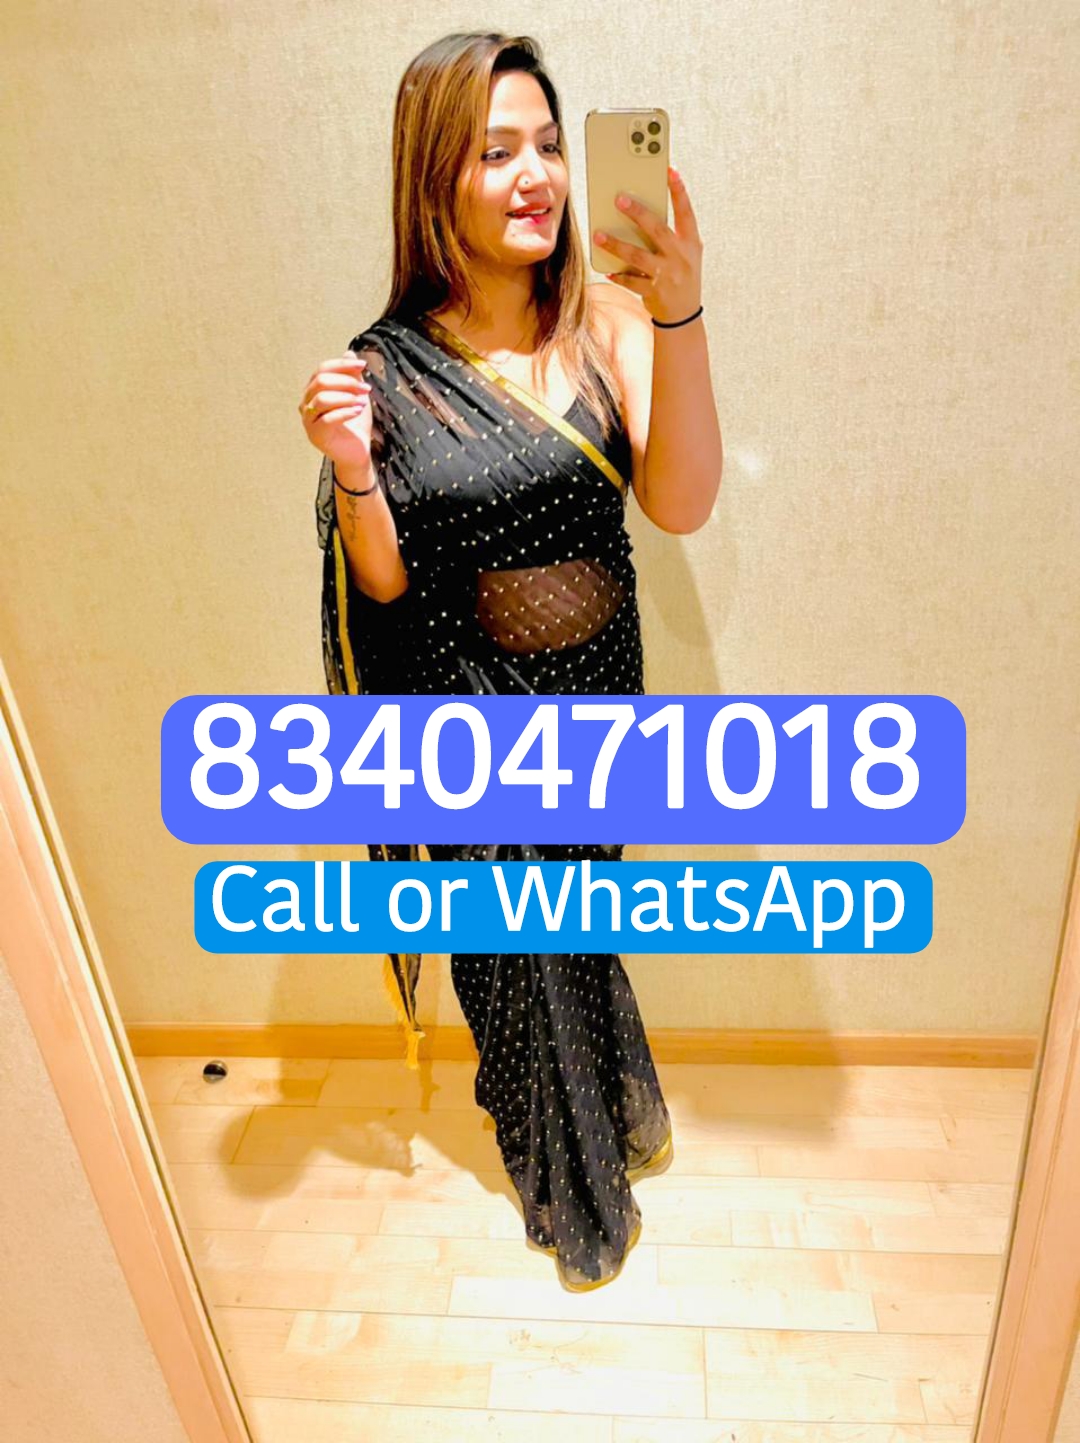 Kanpur Call Girls, Genuine Kanpur Escorts Service - Masticlubs